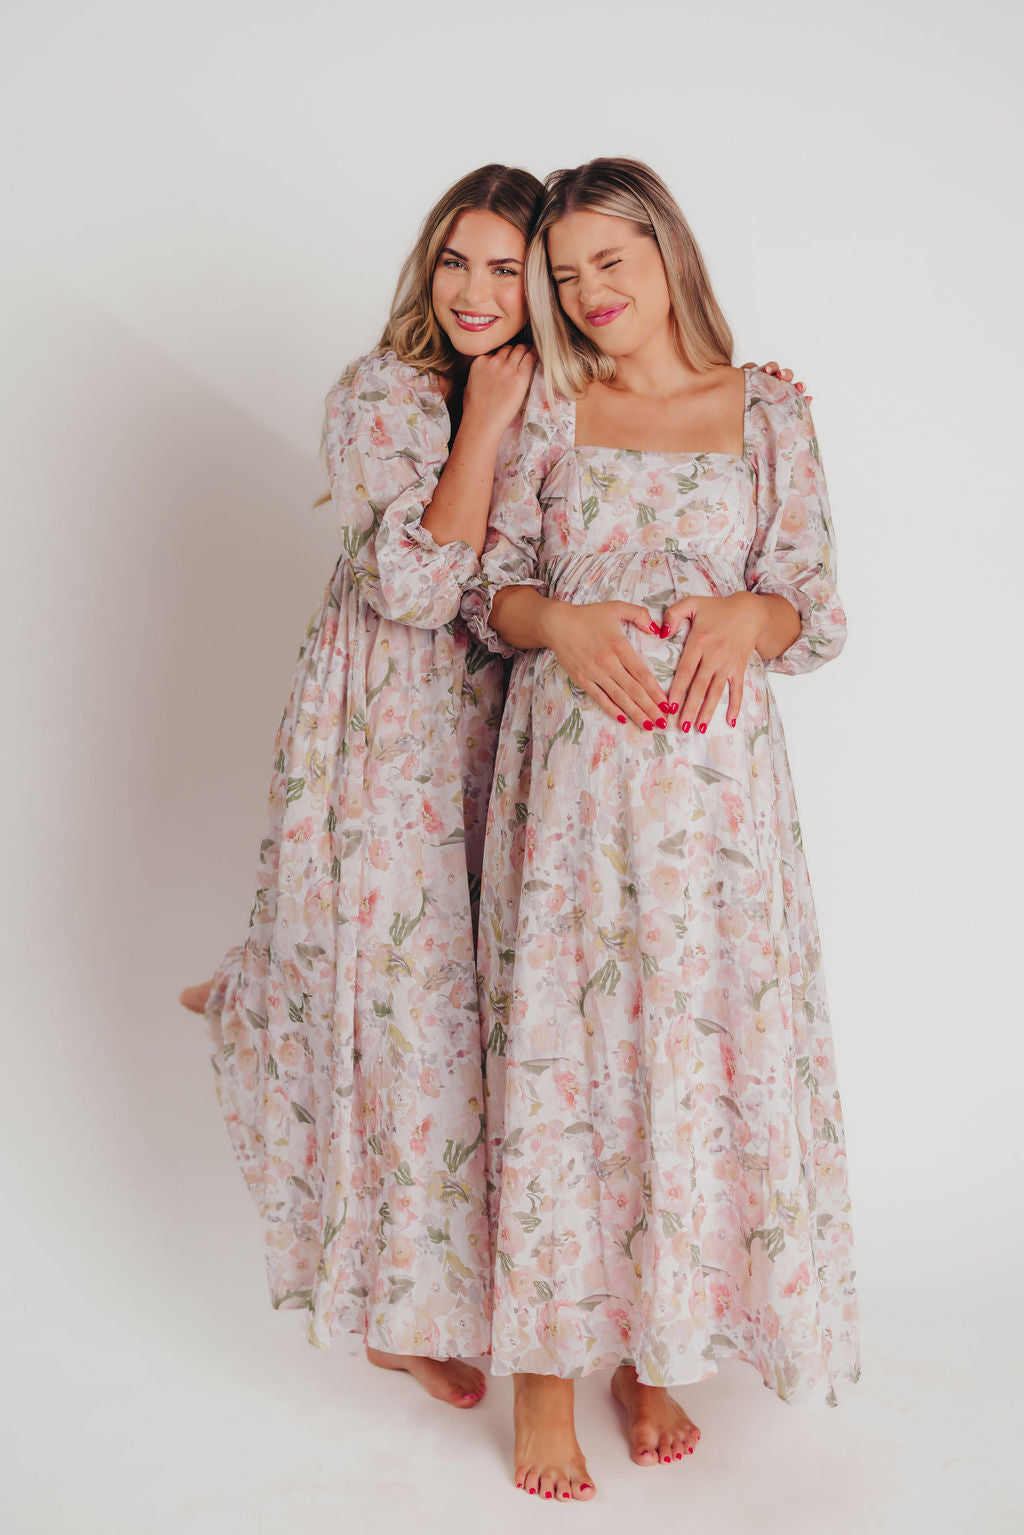 Mona Maxi Dress in Fall Floral - Bump Friendly - Inclusive Sizing (S-3XL)